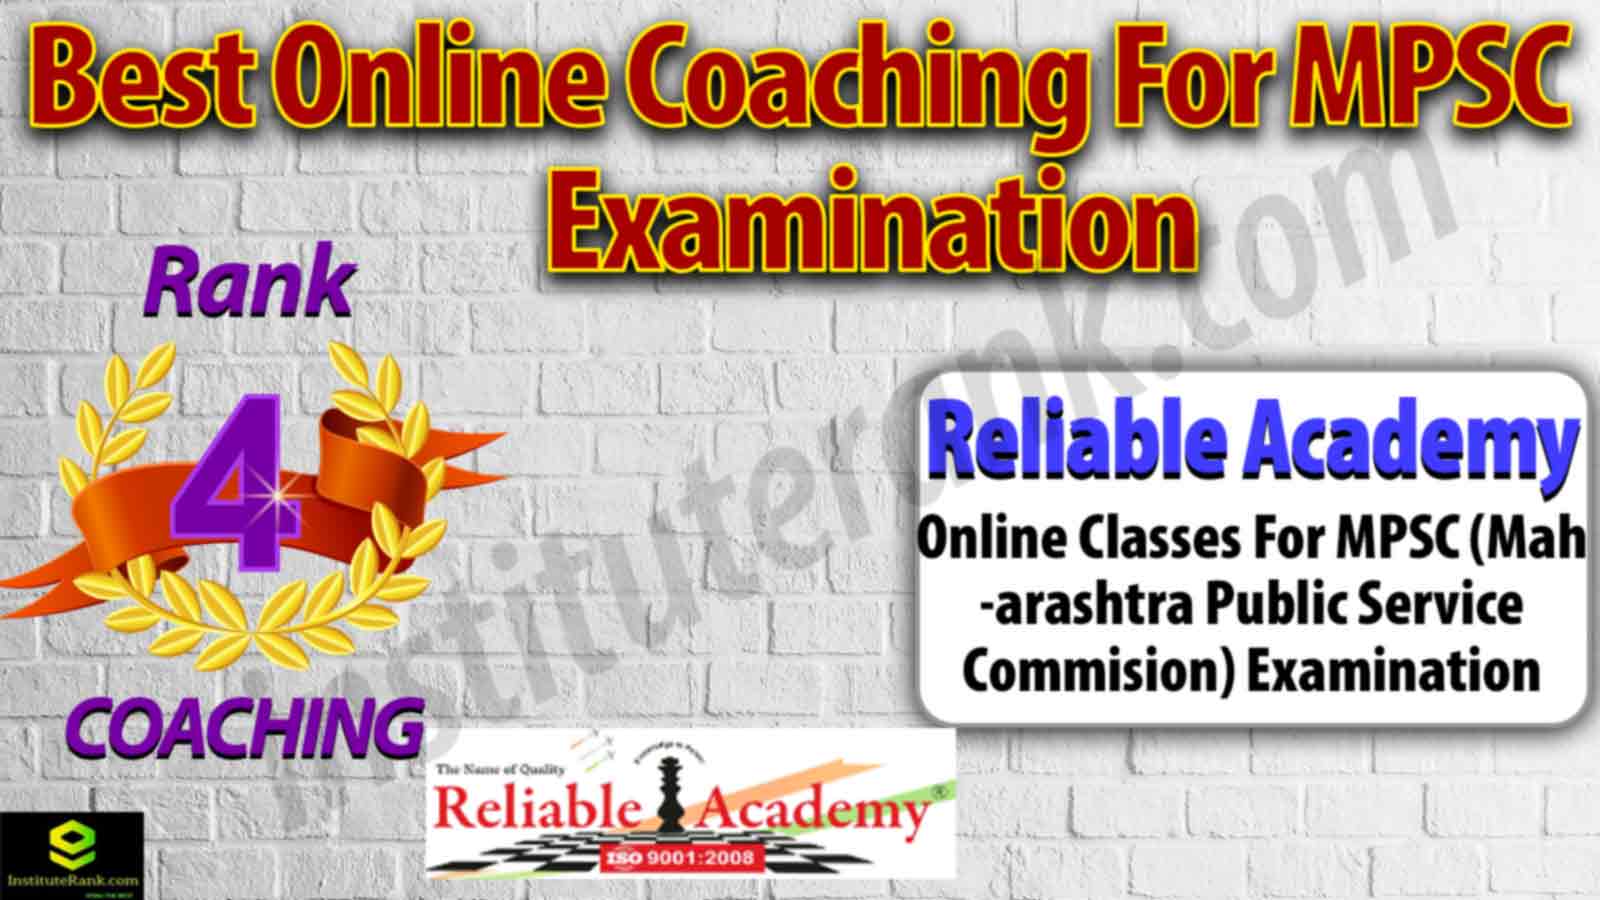 Top Online Coaching for MPSC Examination